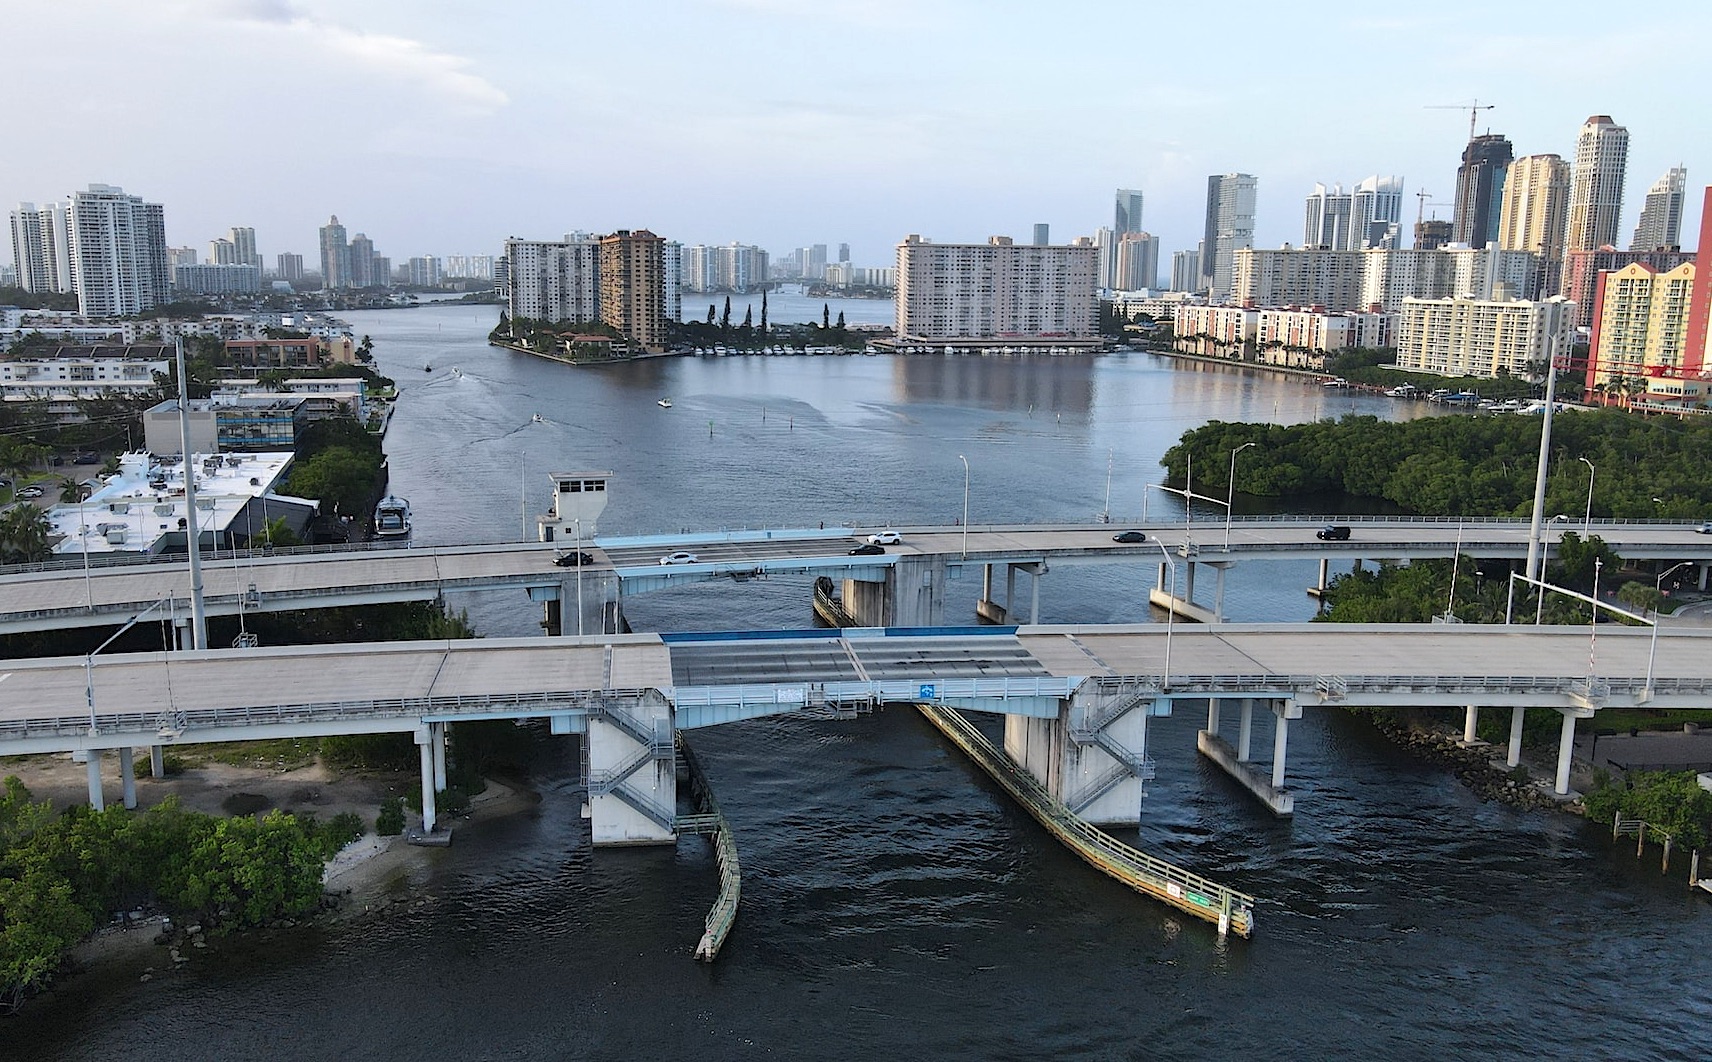 NORTH MIAMI LAUNCHES PROGRAM TO SUPPORT AND DEVELOP STARTUPS